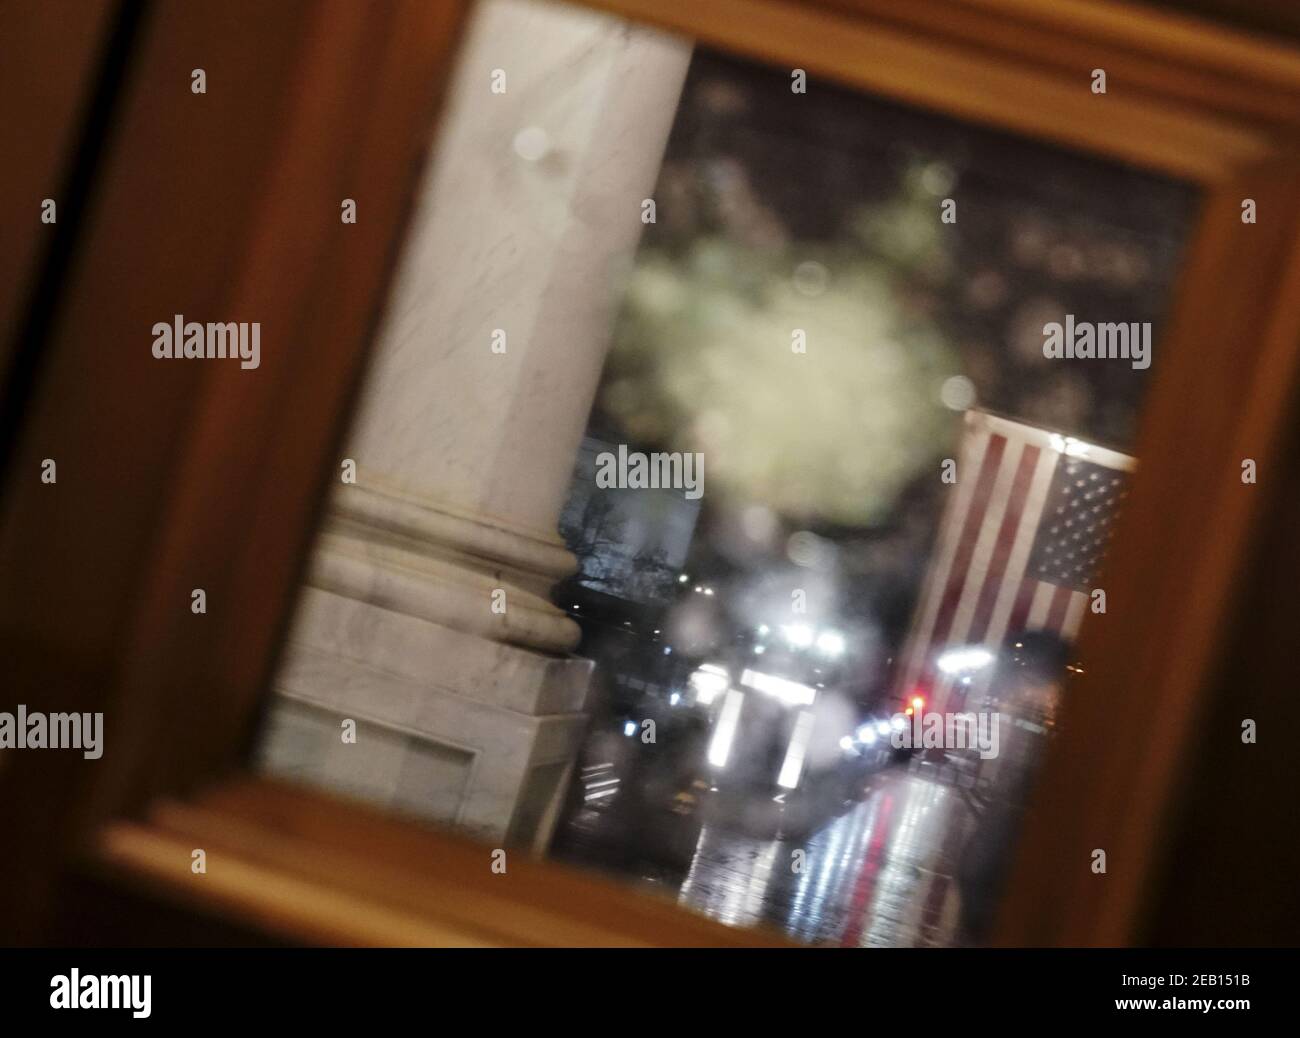 Washington, United States. 11th Feb, 2021. The American flag is seen reflected in a glass-paneled door that was shattered by rioters on January 6 at the U.S. Capitol building in Washington, DC on Thursday, February 11, 2021. On the morning of February 11, workers were seen replacing the shattered glass. Photo by Leigh Vogel/UPI Credit: UPI/Alamy Live News Stock Photo